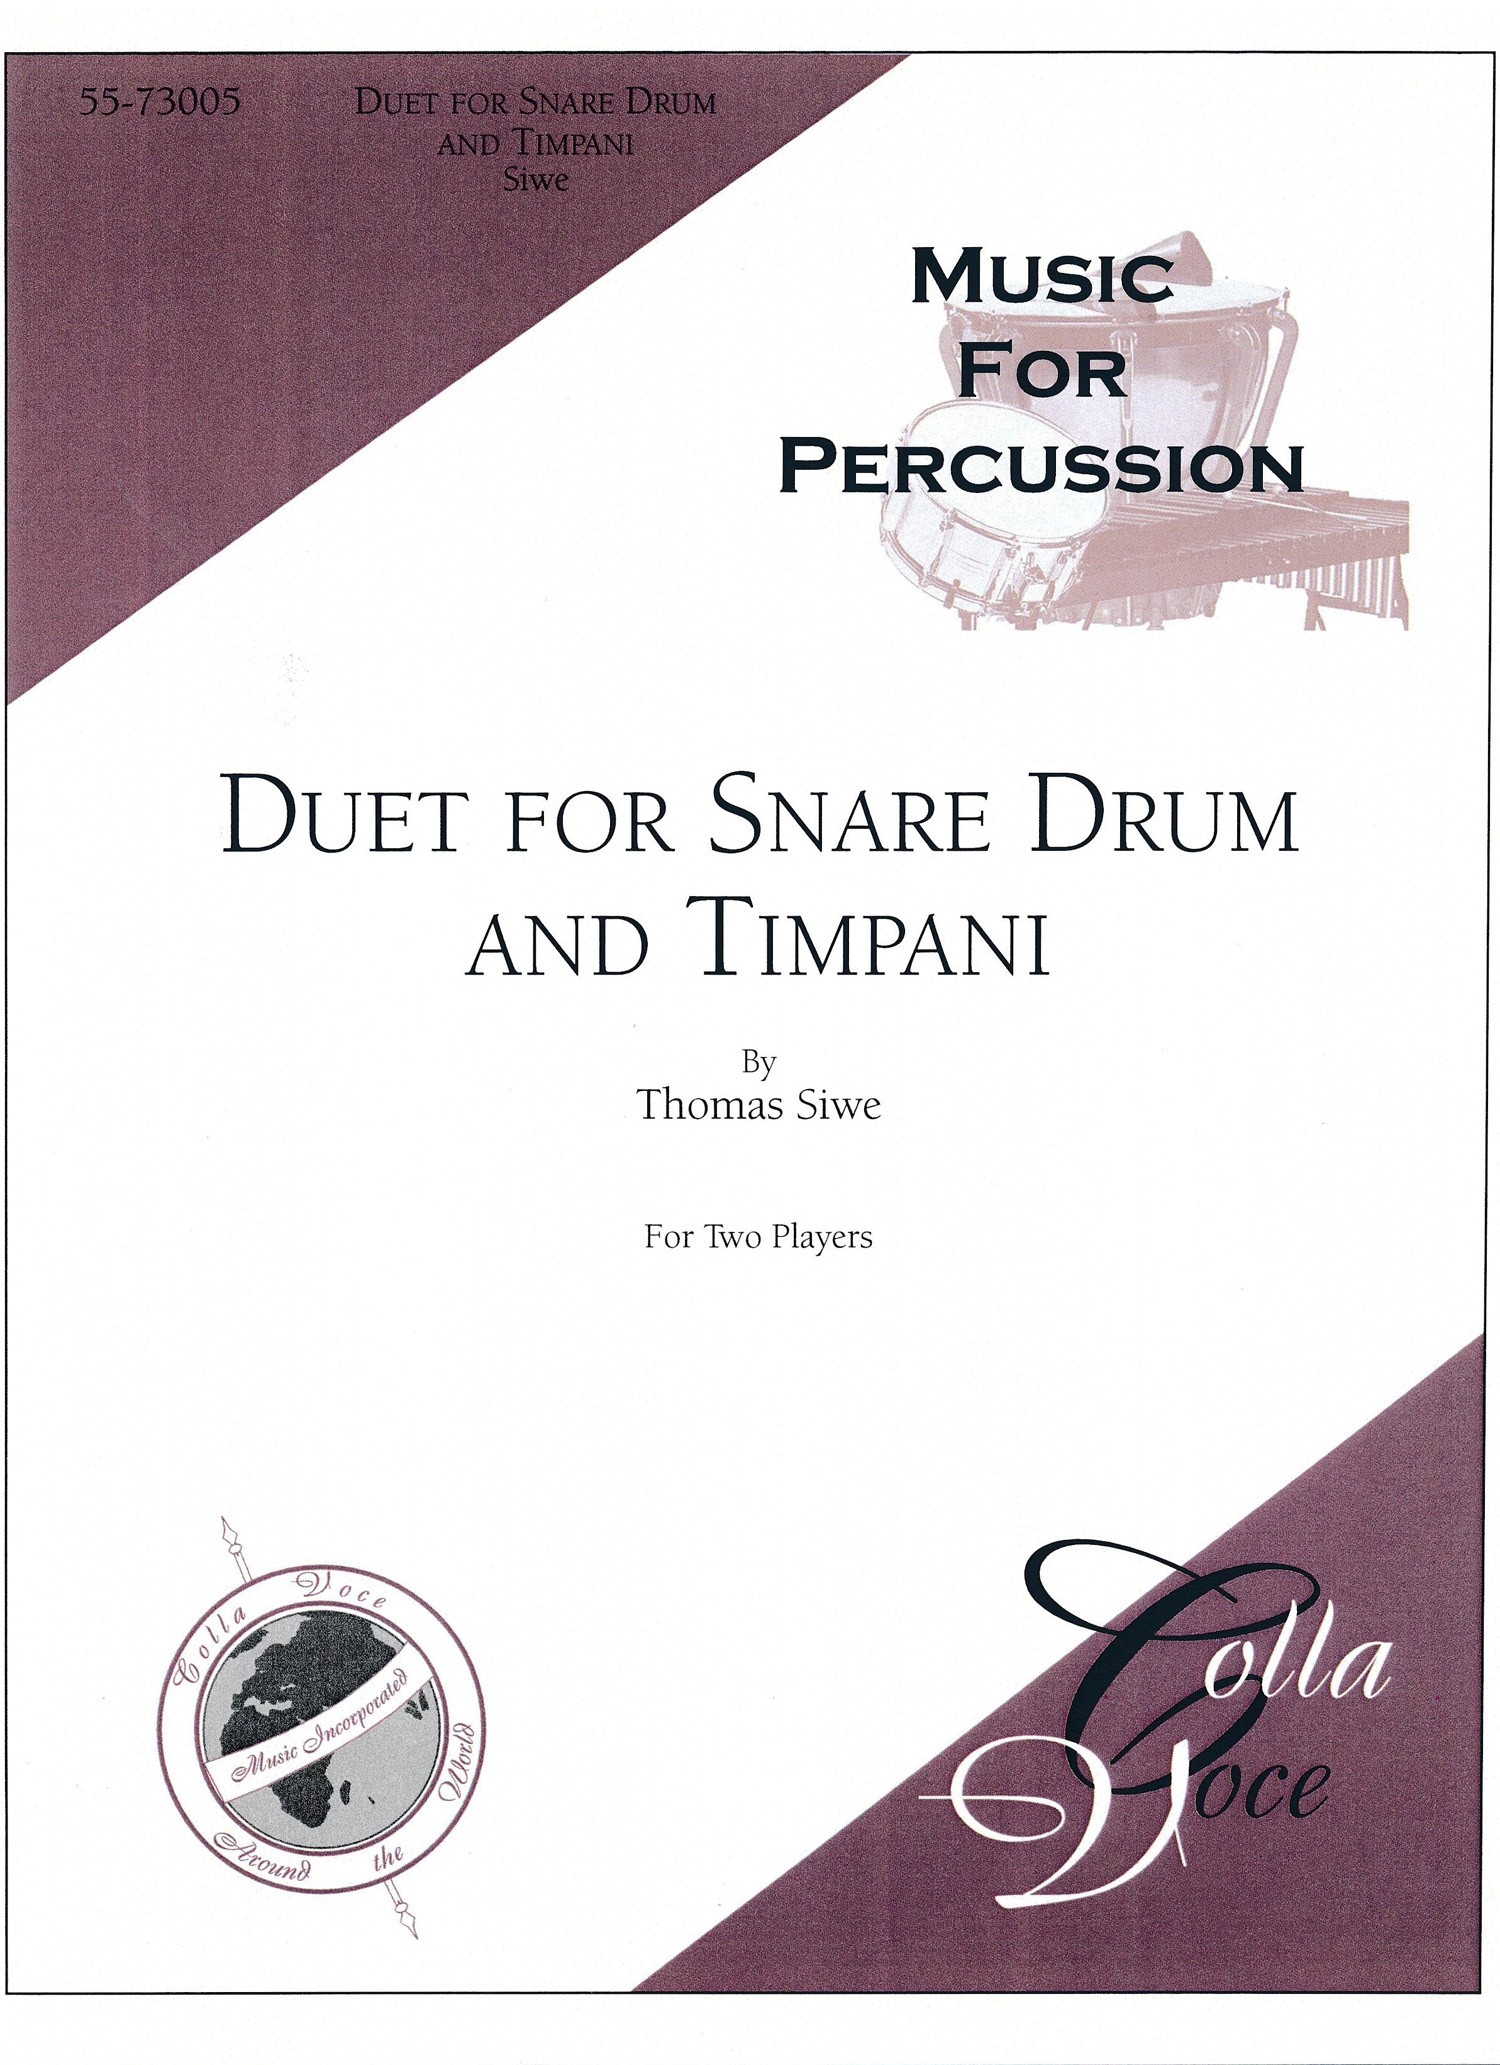 Duet For Snare Drum And Timpani